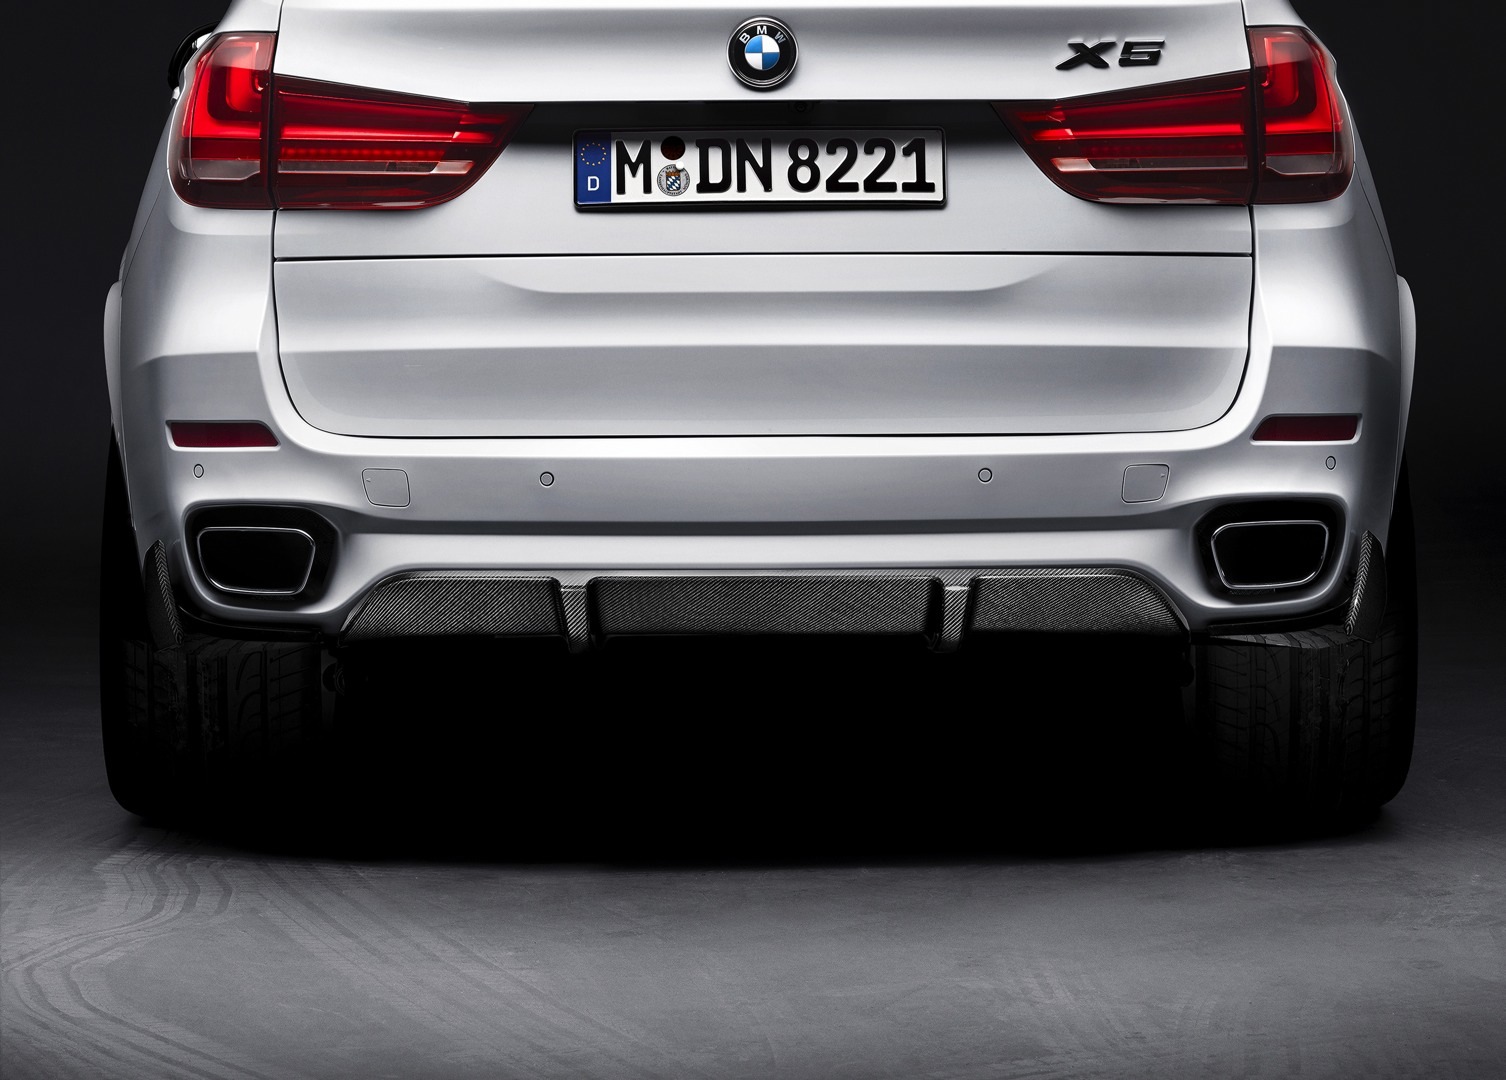 Bmw parts performance products